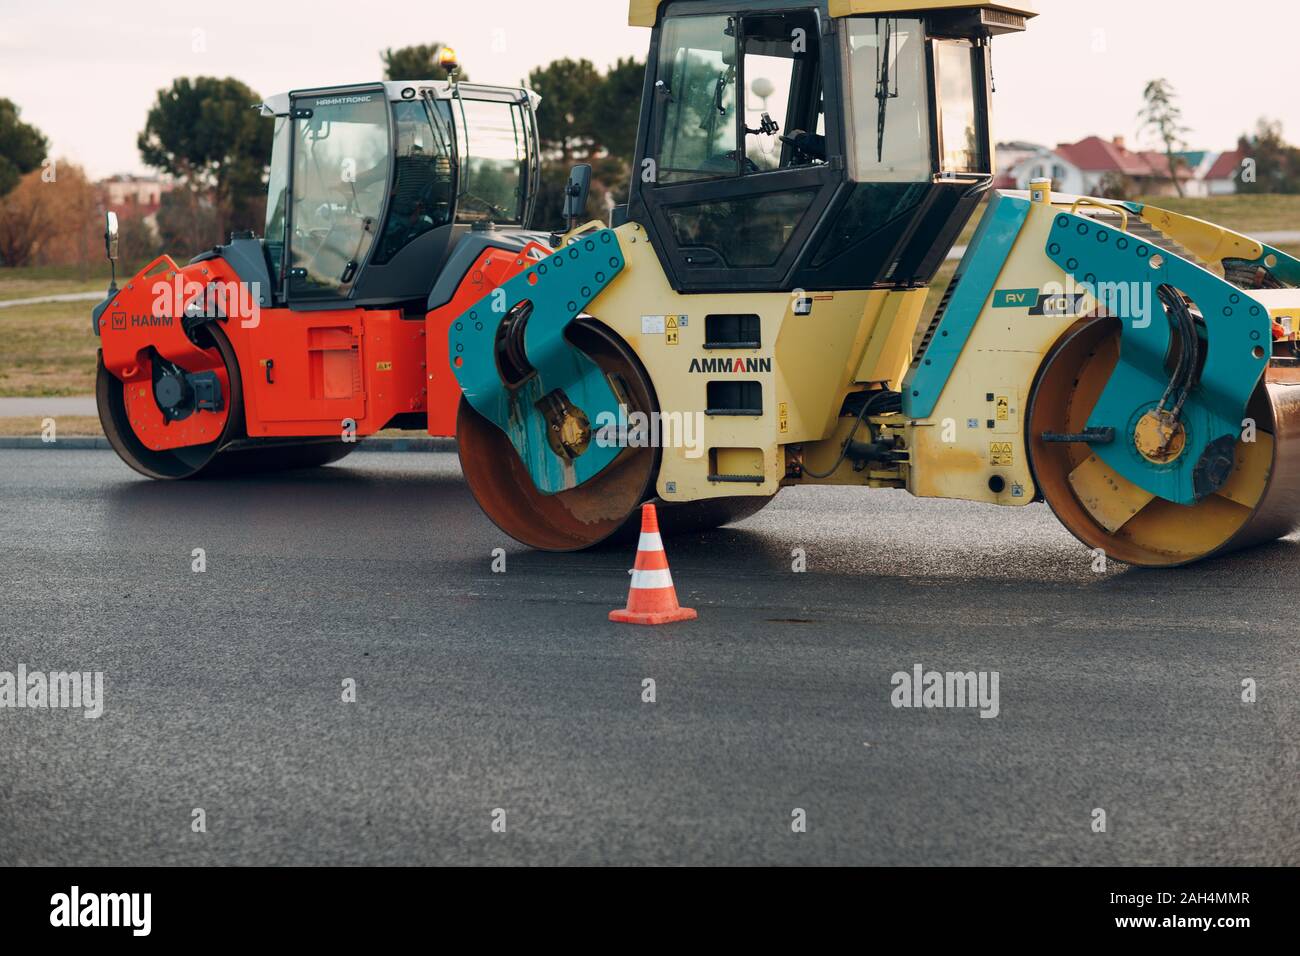 Asphalt paving. Paver machine and road roller. New road construction. Stock Photo